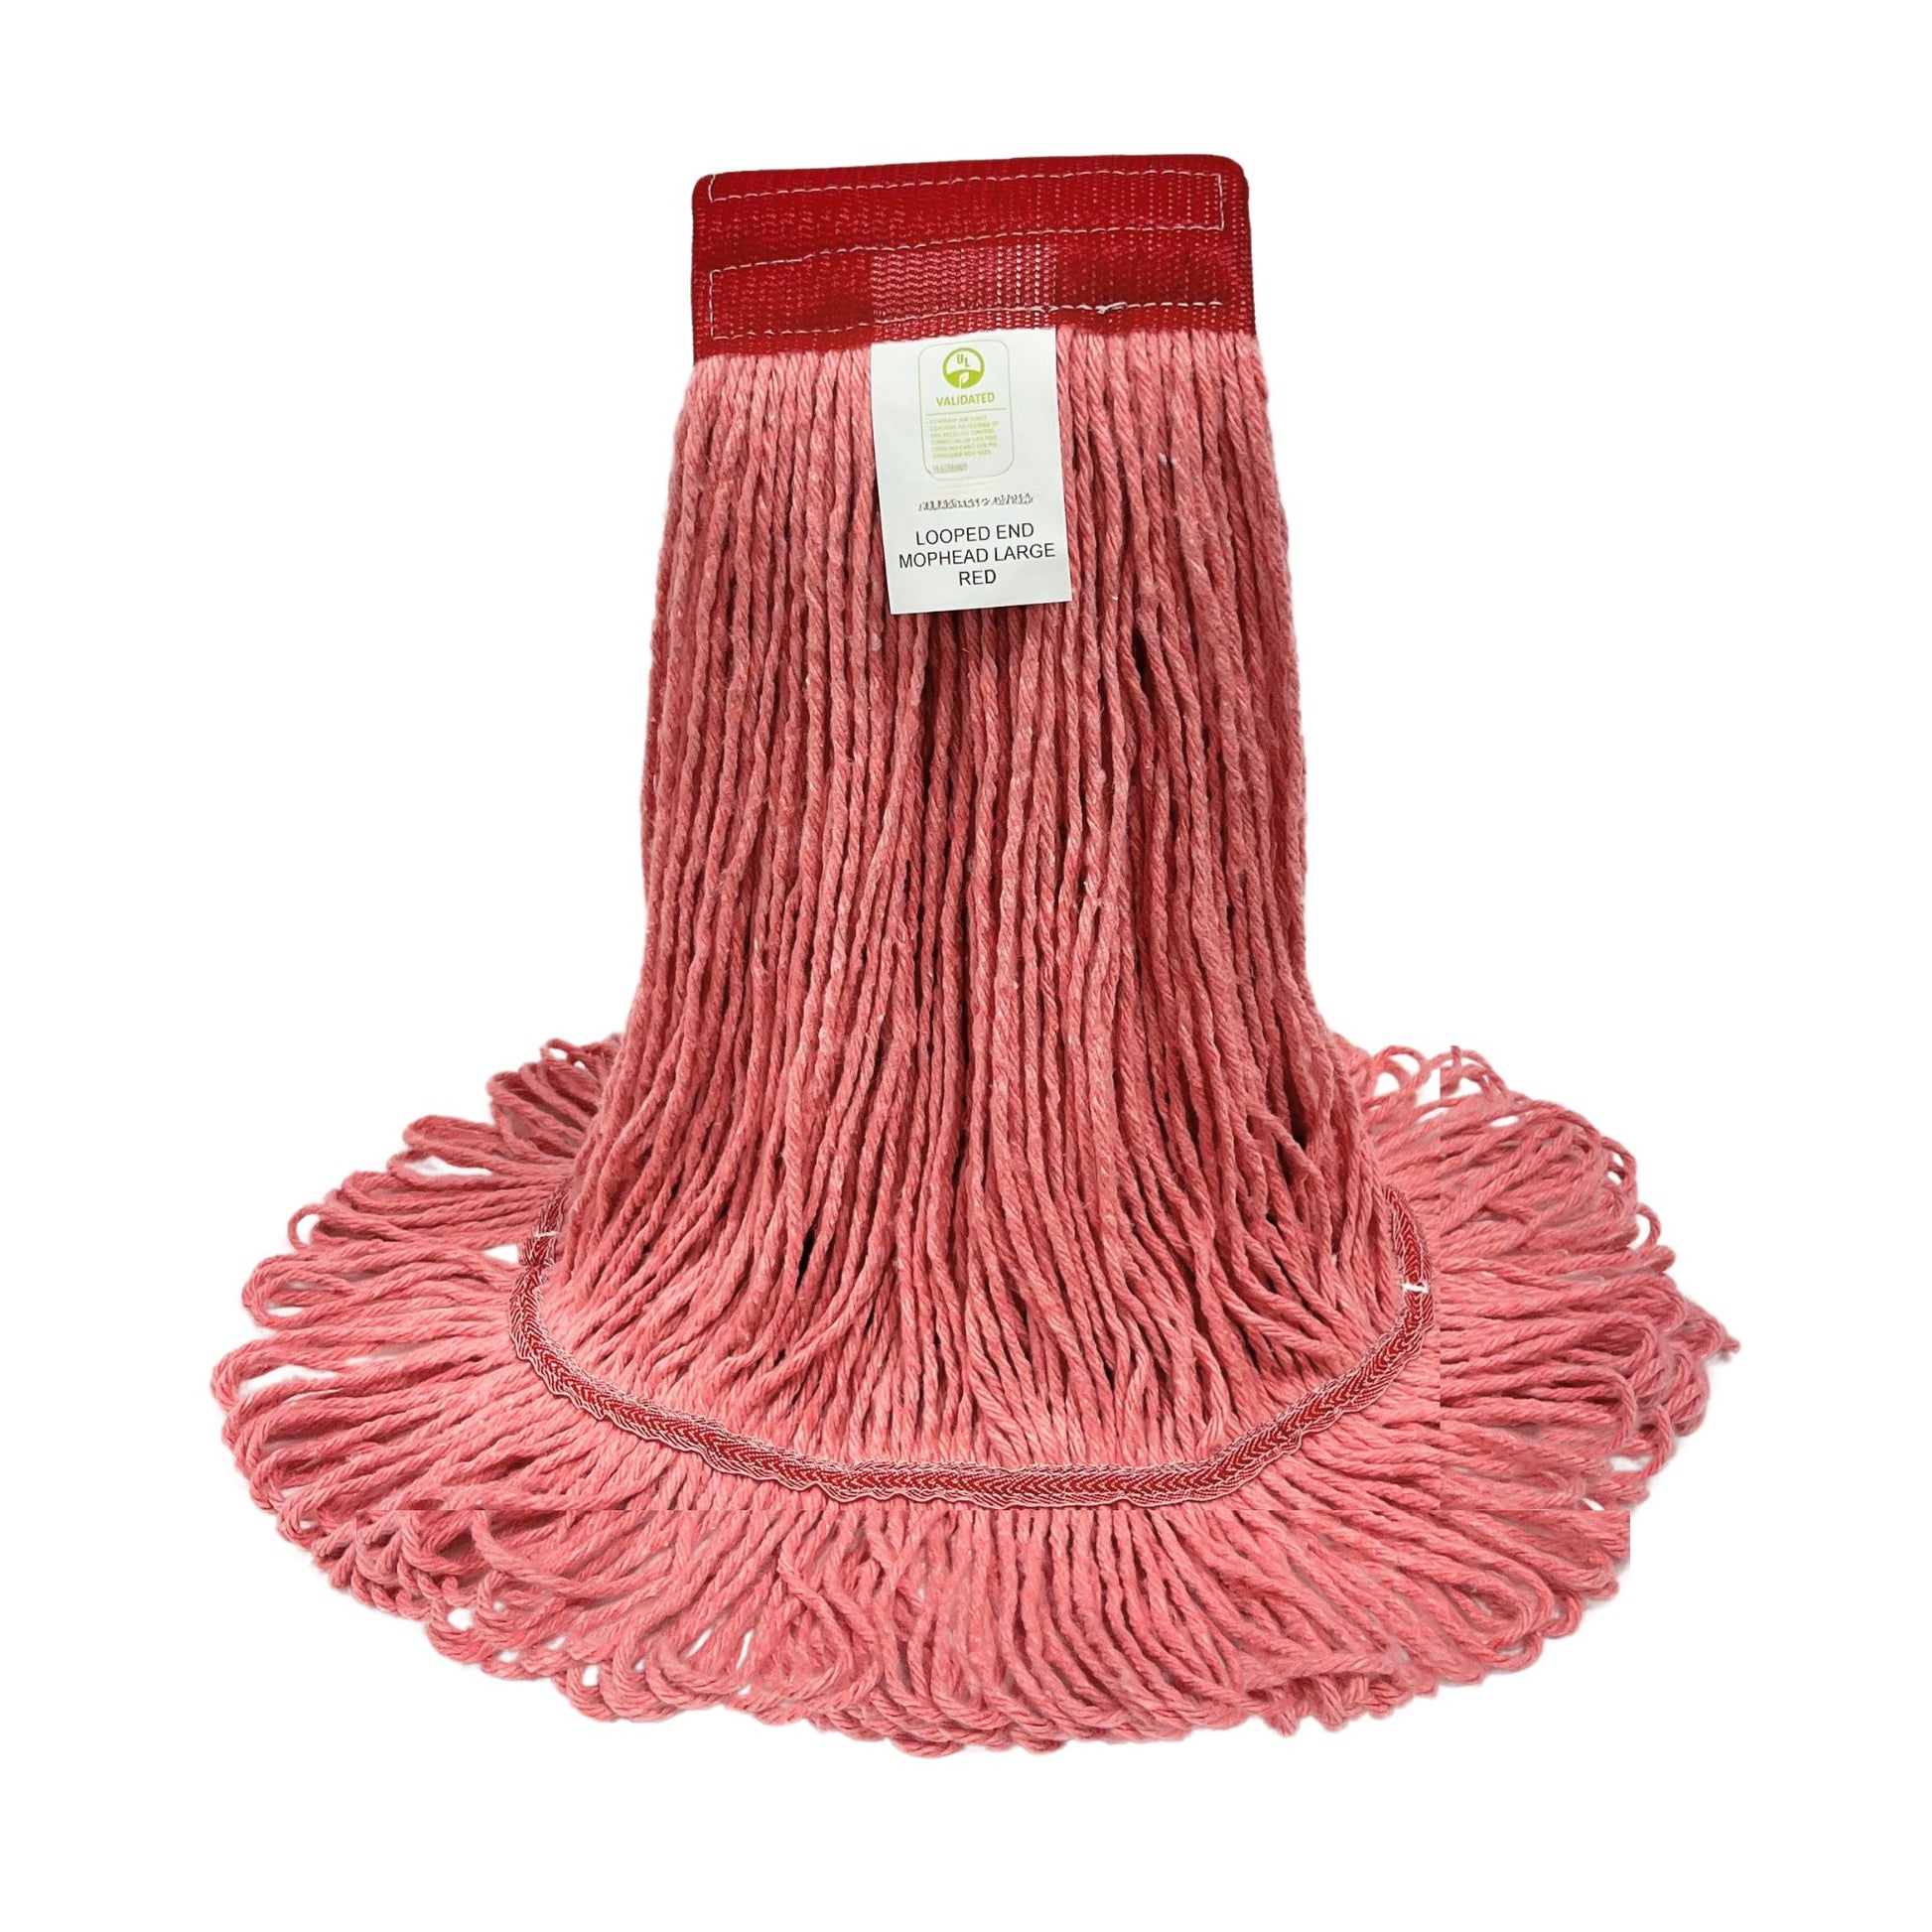 Echo Mop Large Red